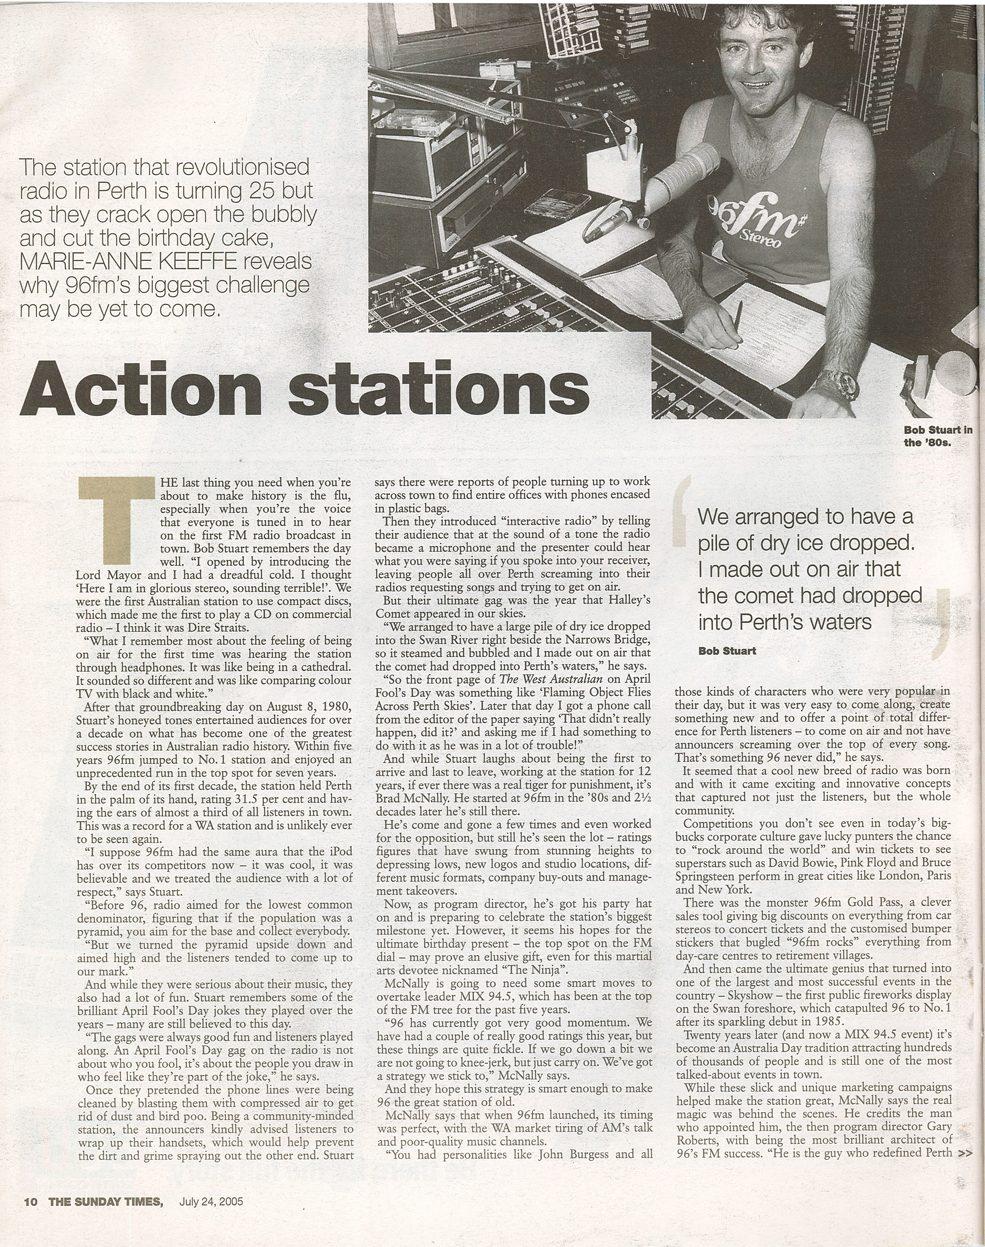 2005.08.24 - Article - Action Stations - Page 10 - The Sunday Times.png